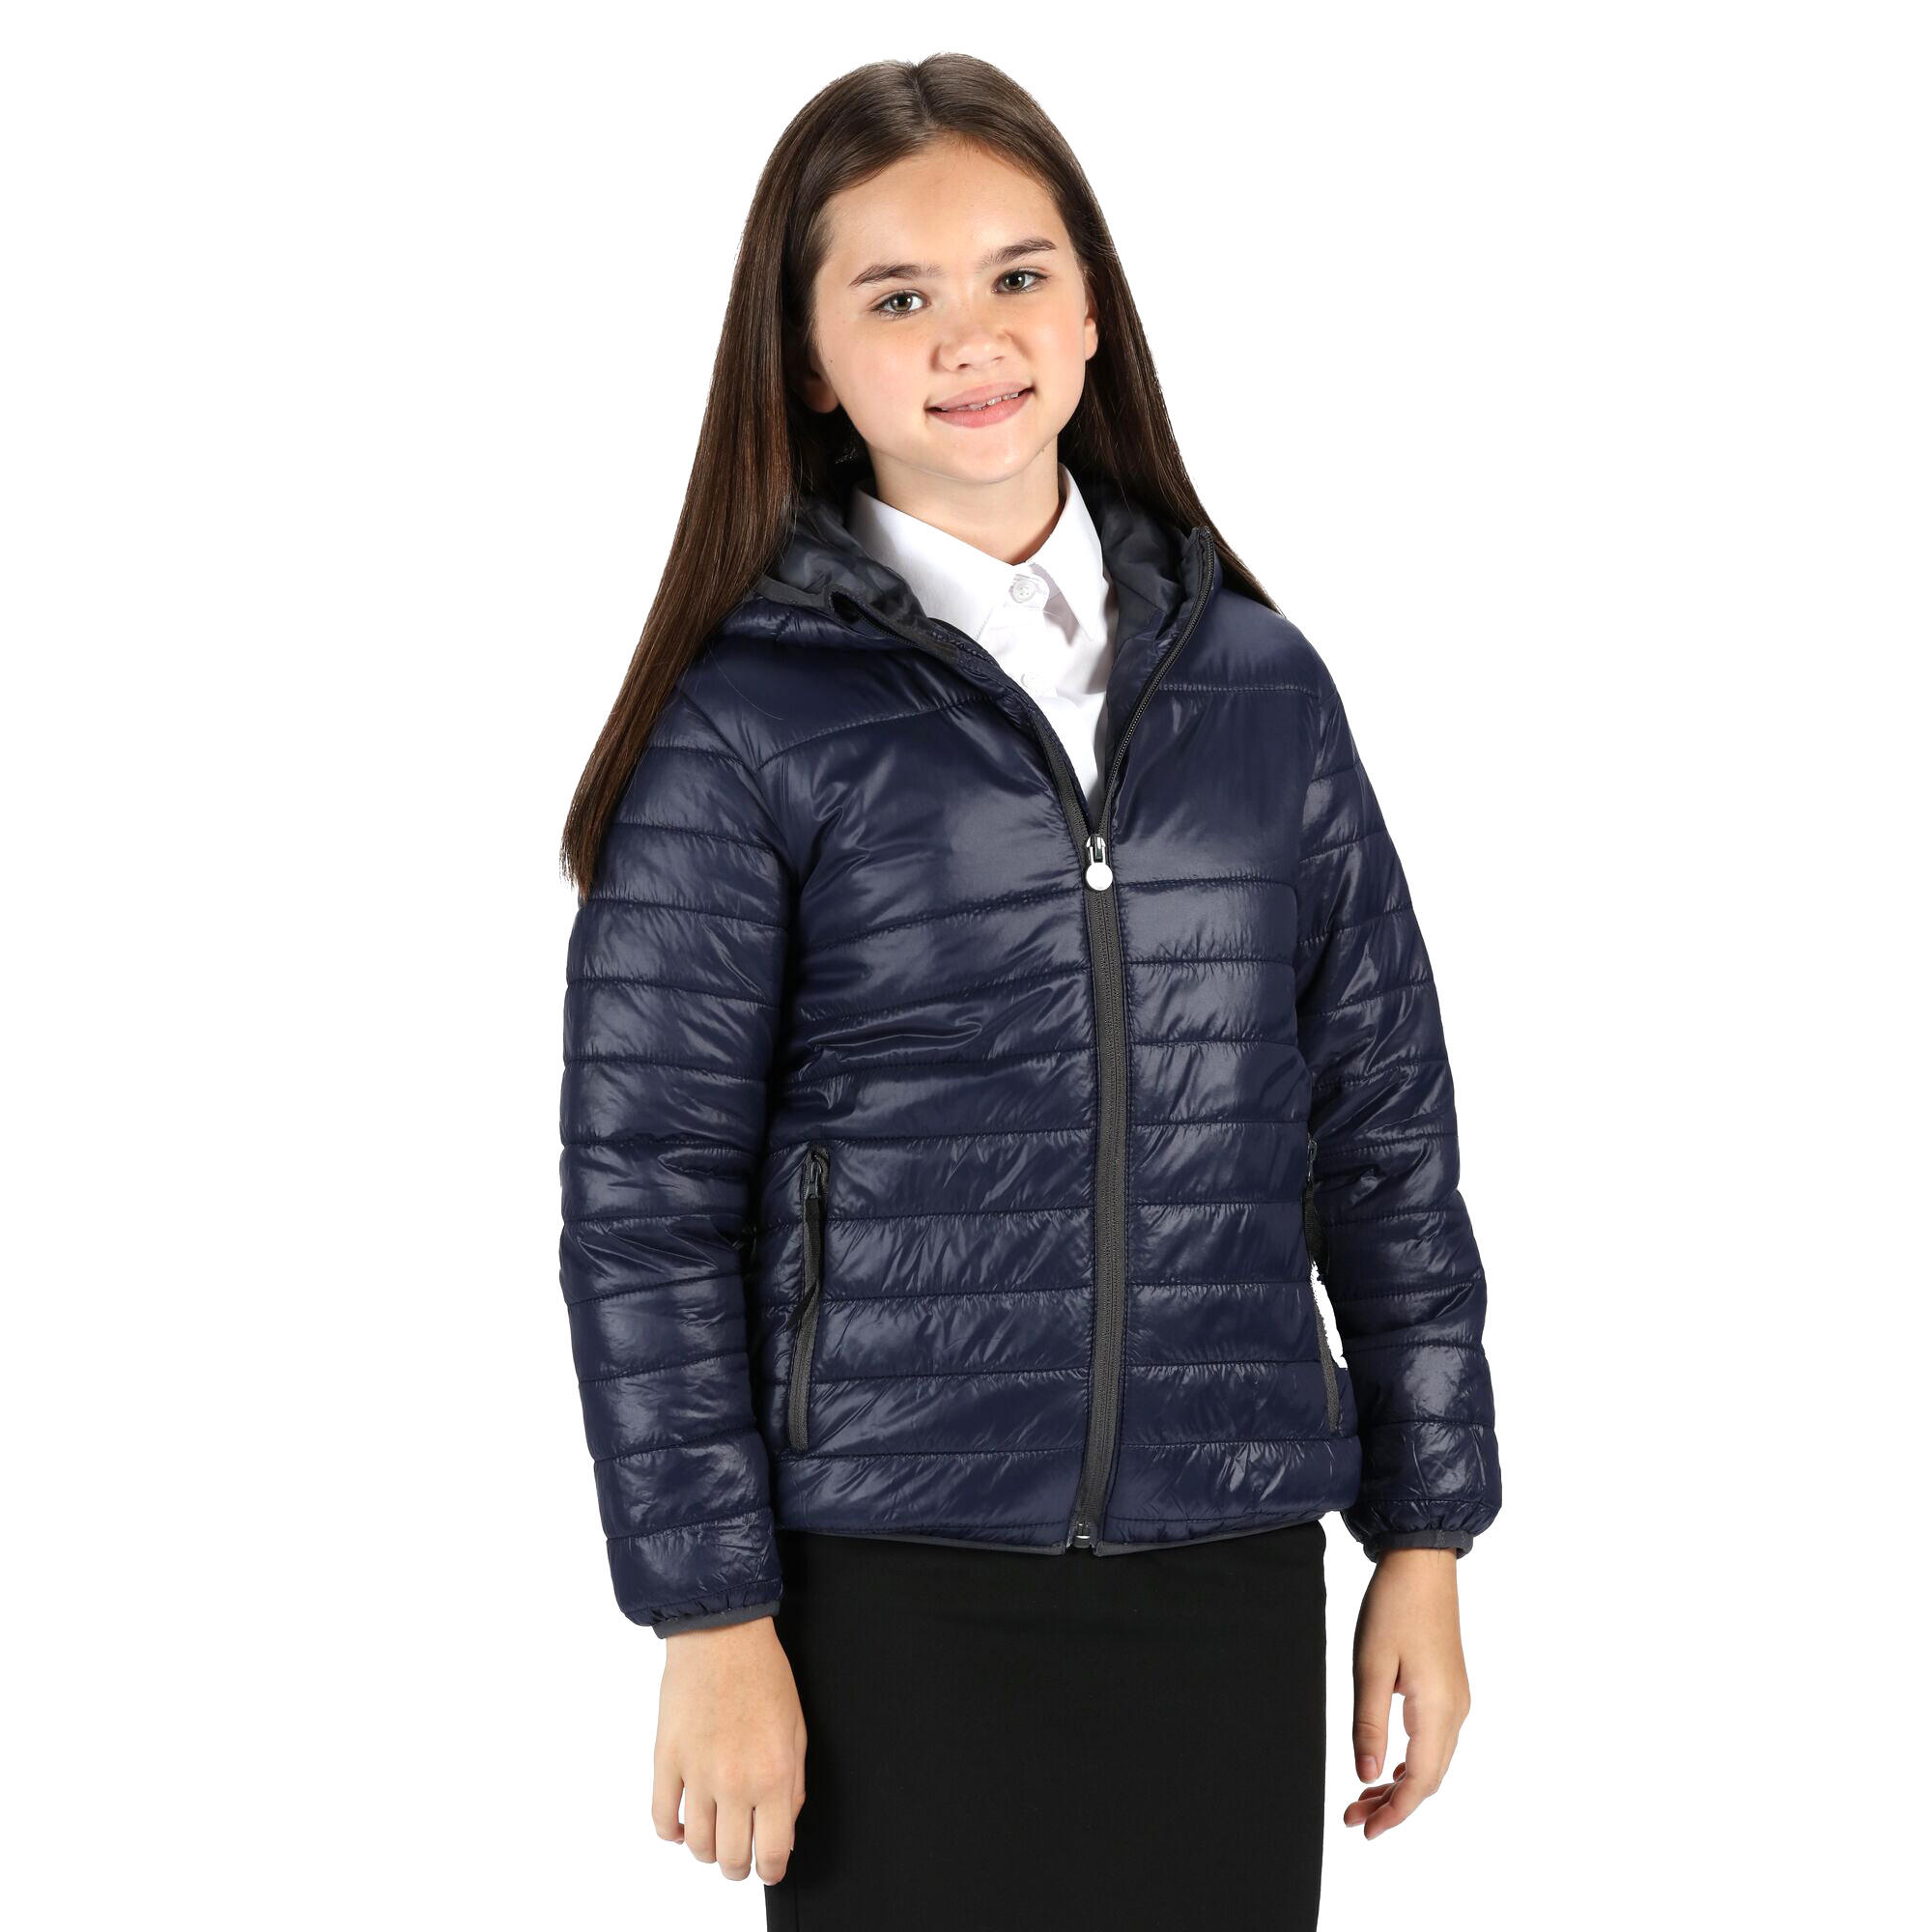 Childrens/Kids Stormforce Thermal Insulated Jacket (Navy) 1/4